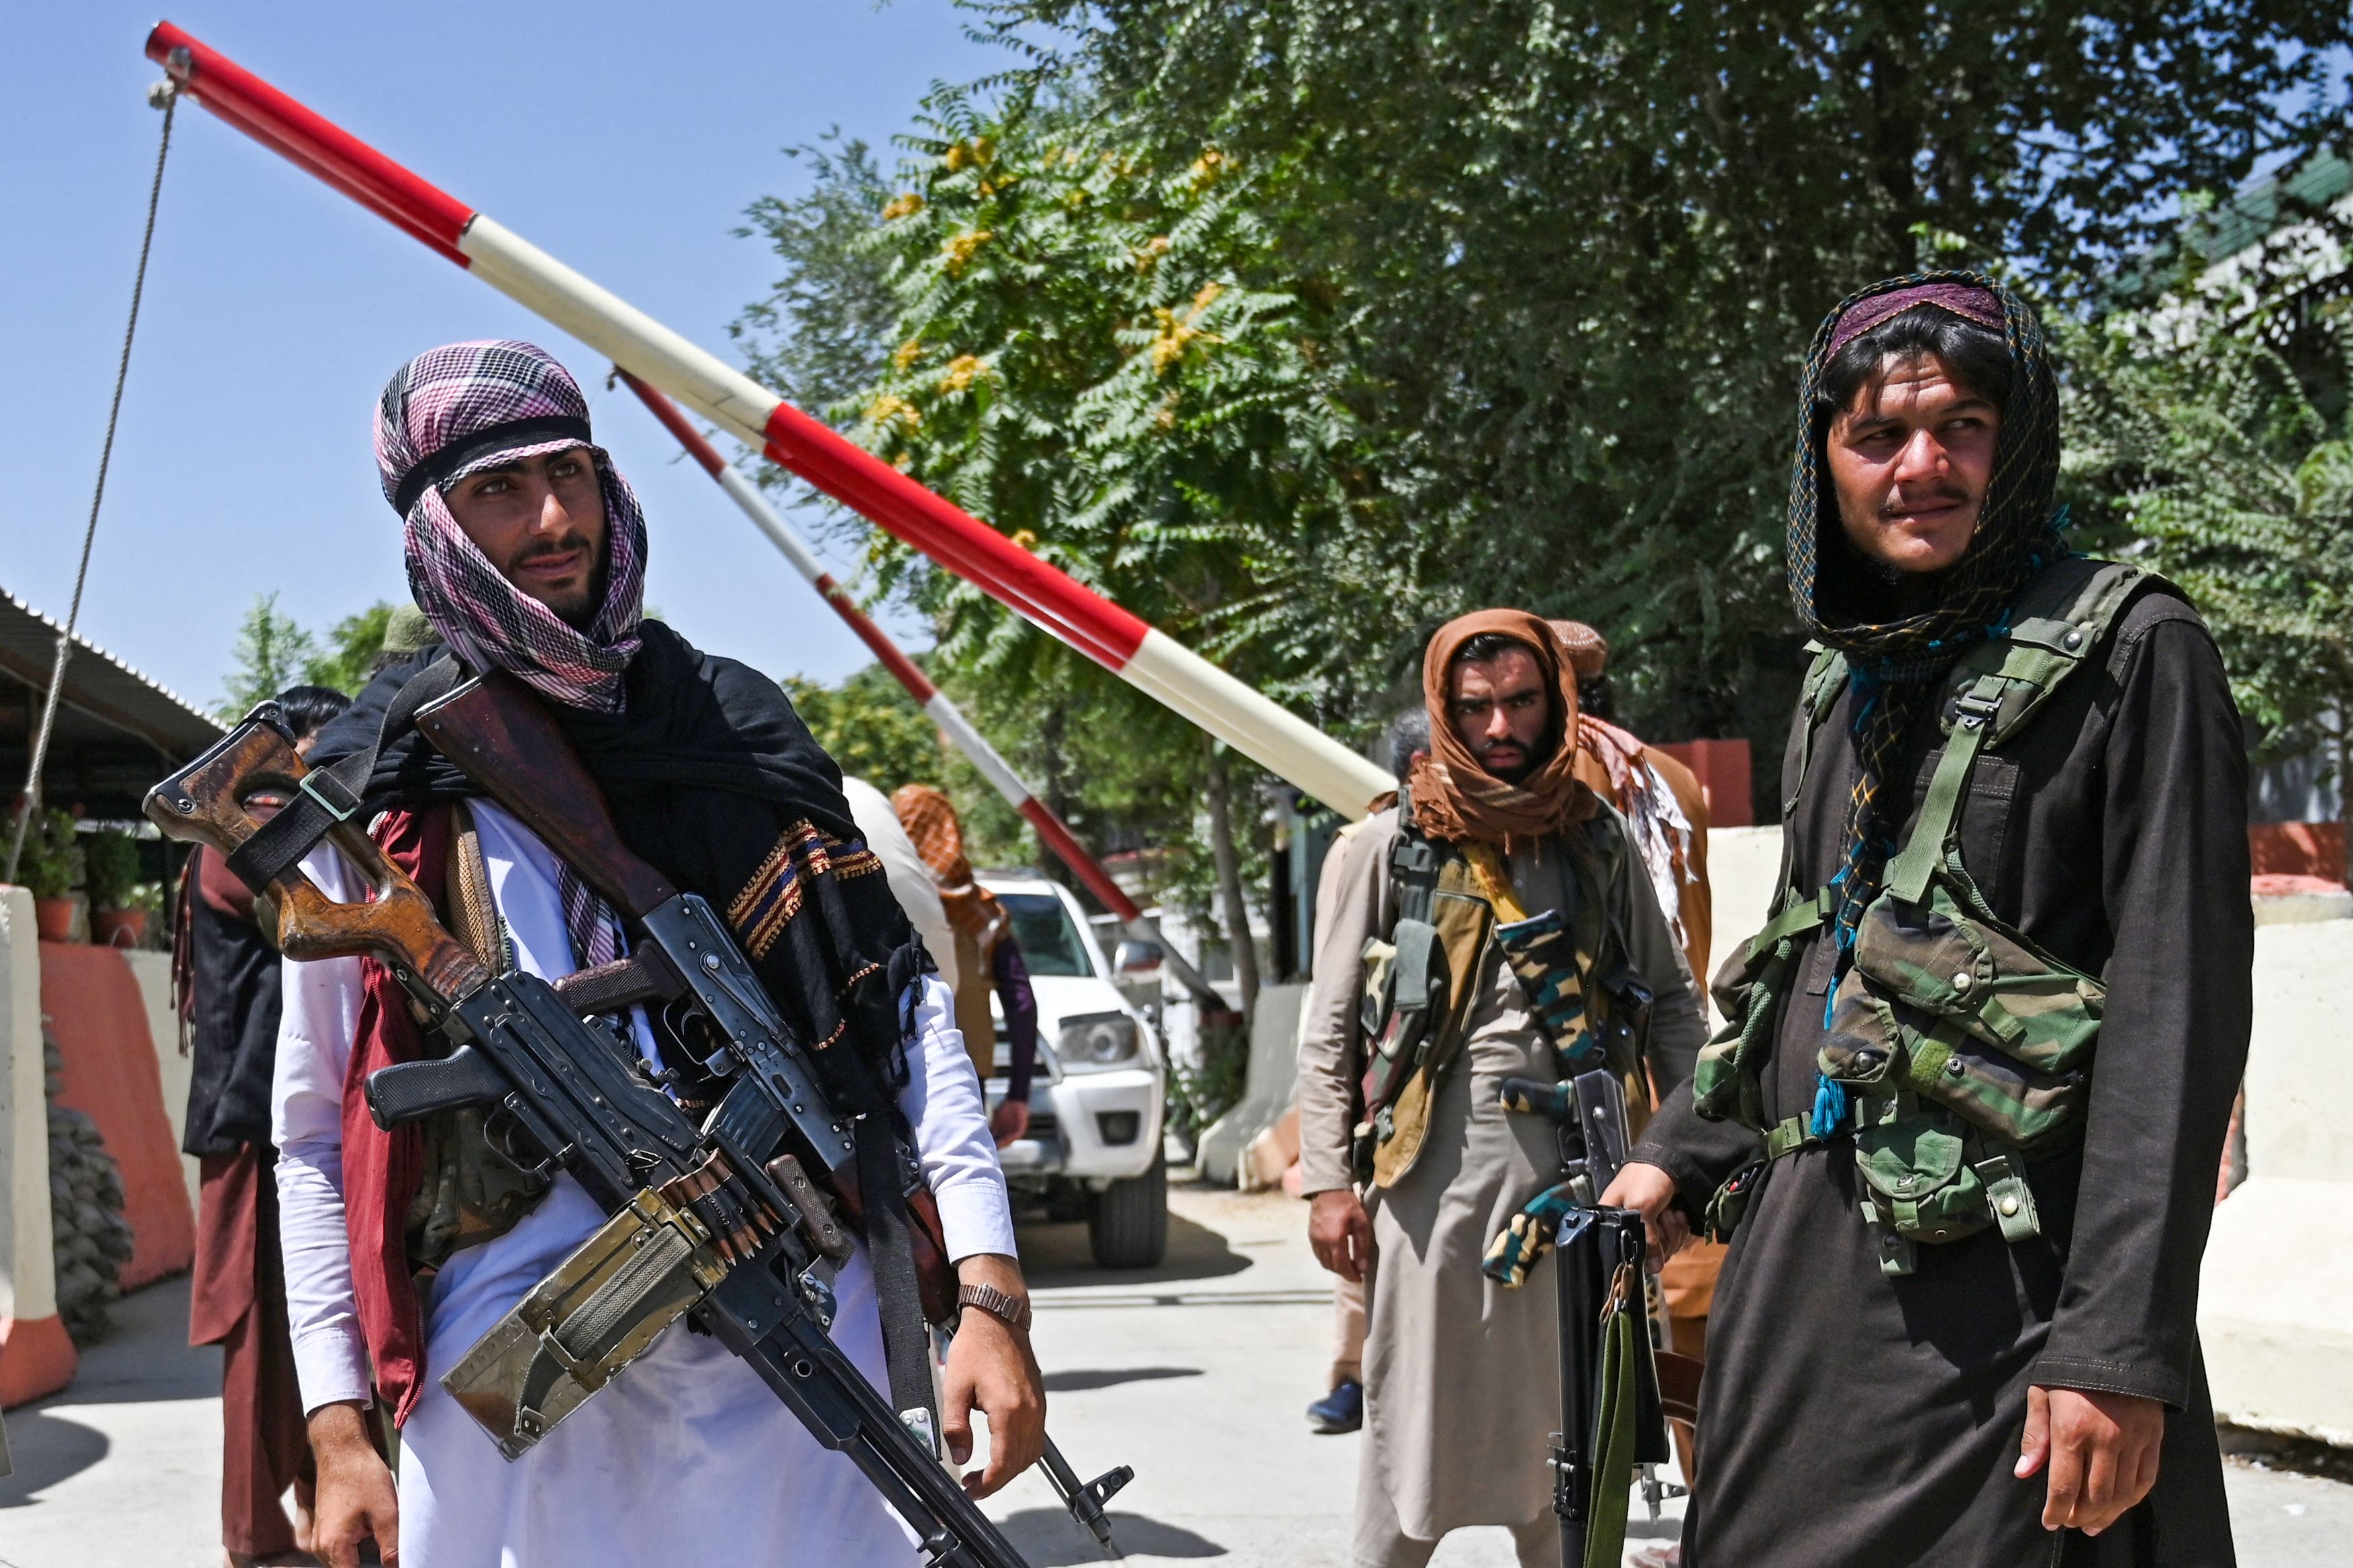 Taliban fighters stand guard along a roadside near the Zanbaq Square in Kabul on August 16, 2021, after a stunningly swift end to Afghanistan’s 20-year war